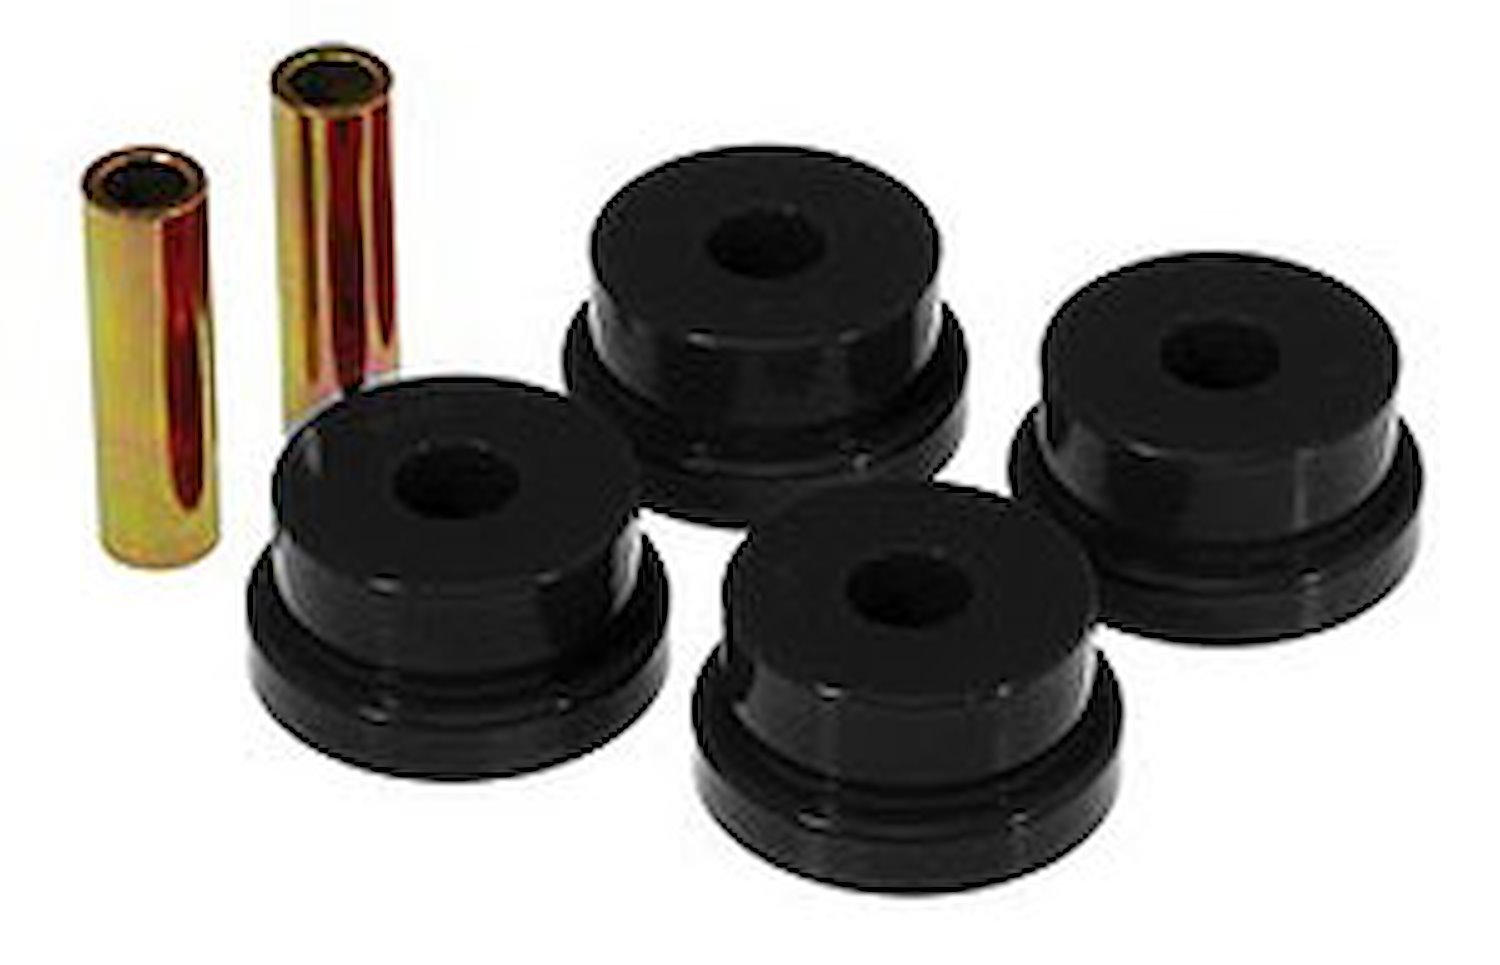 Differential Carrier Bushing Kit 1984-96 Chevelle, El Camino & Monte Carlo